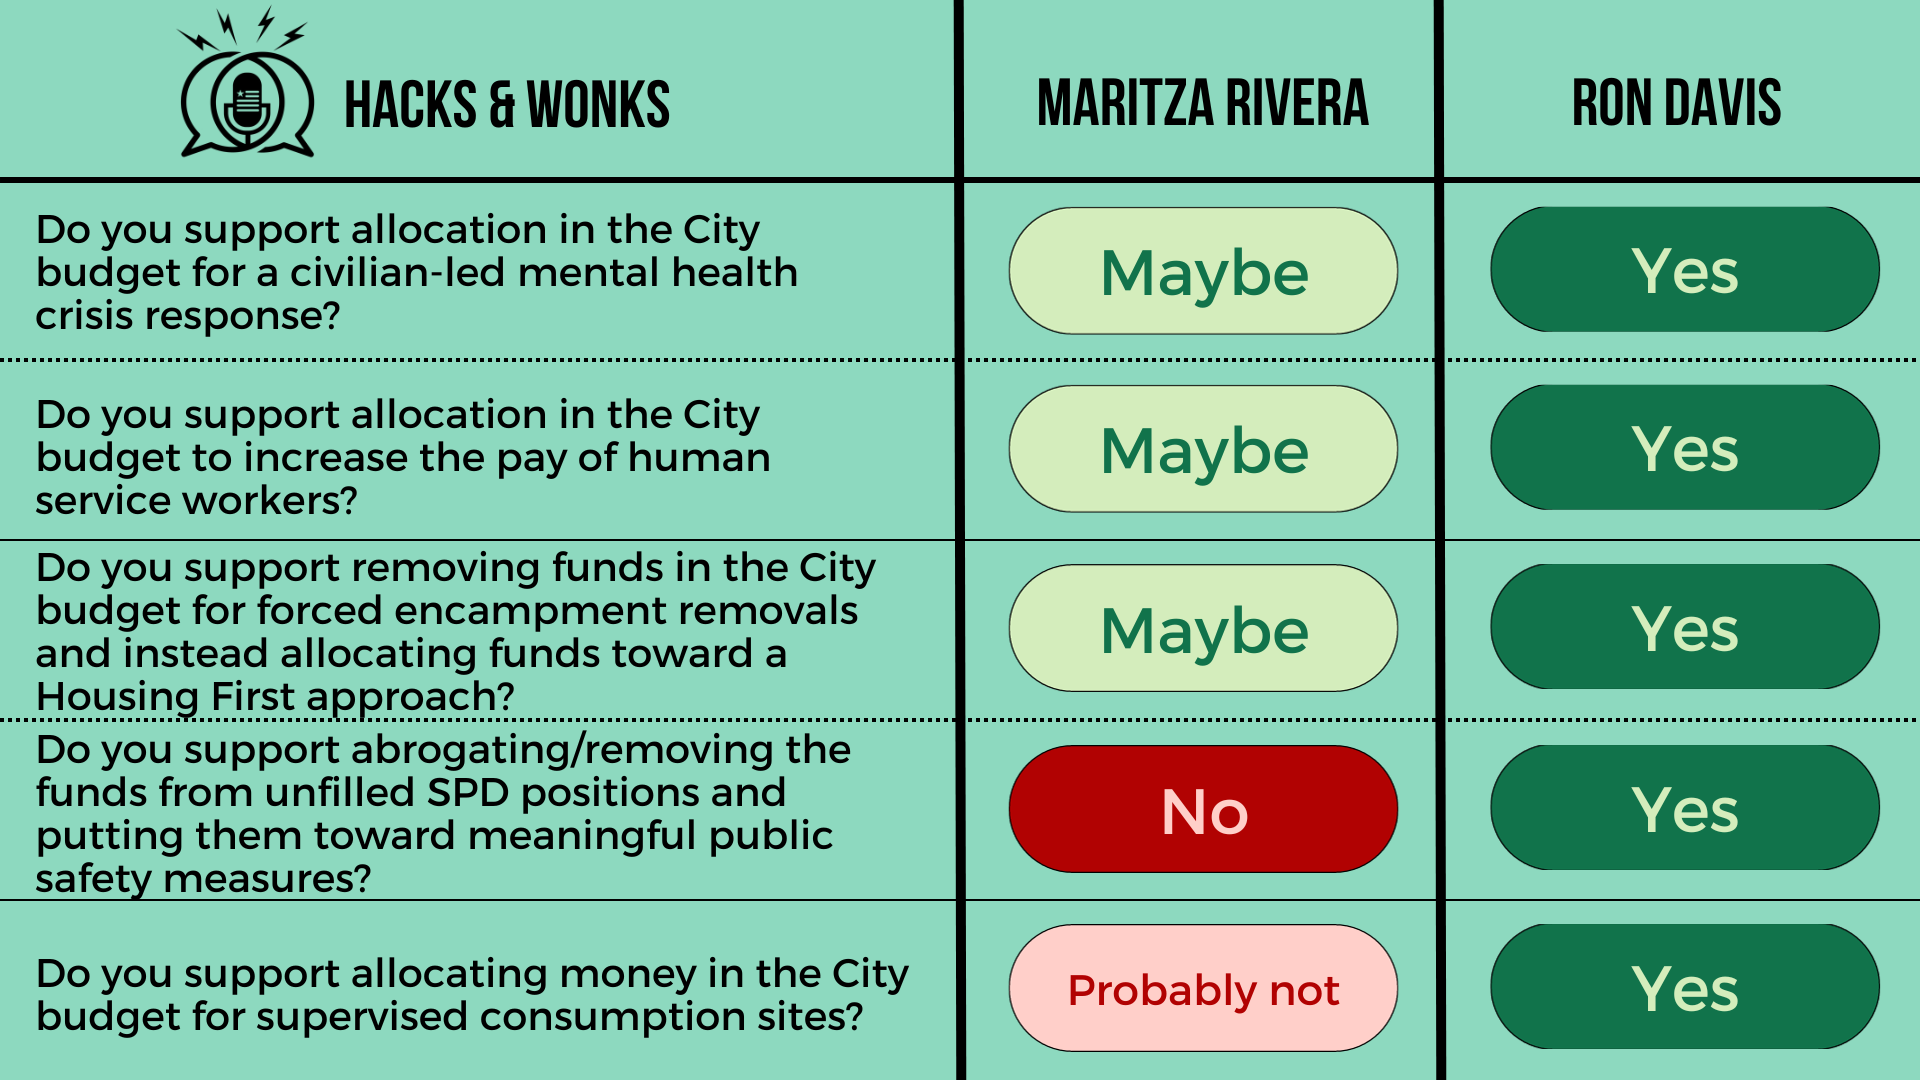 Q: Do you support allocation in the City budget for a civilian-led mental health crisis response? Maritza Rivera: Maybe, Ron Davis: Yes  Q: Do you support allocation in the City budget to increase the pay of human service workers? Maritza Rivera: May